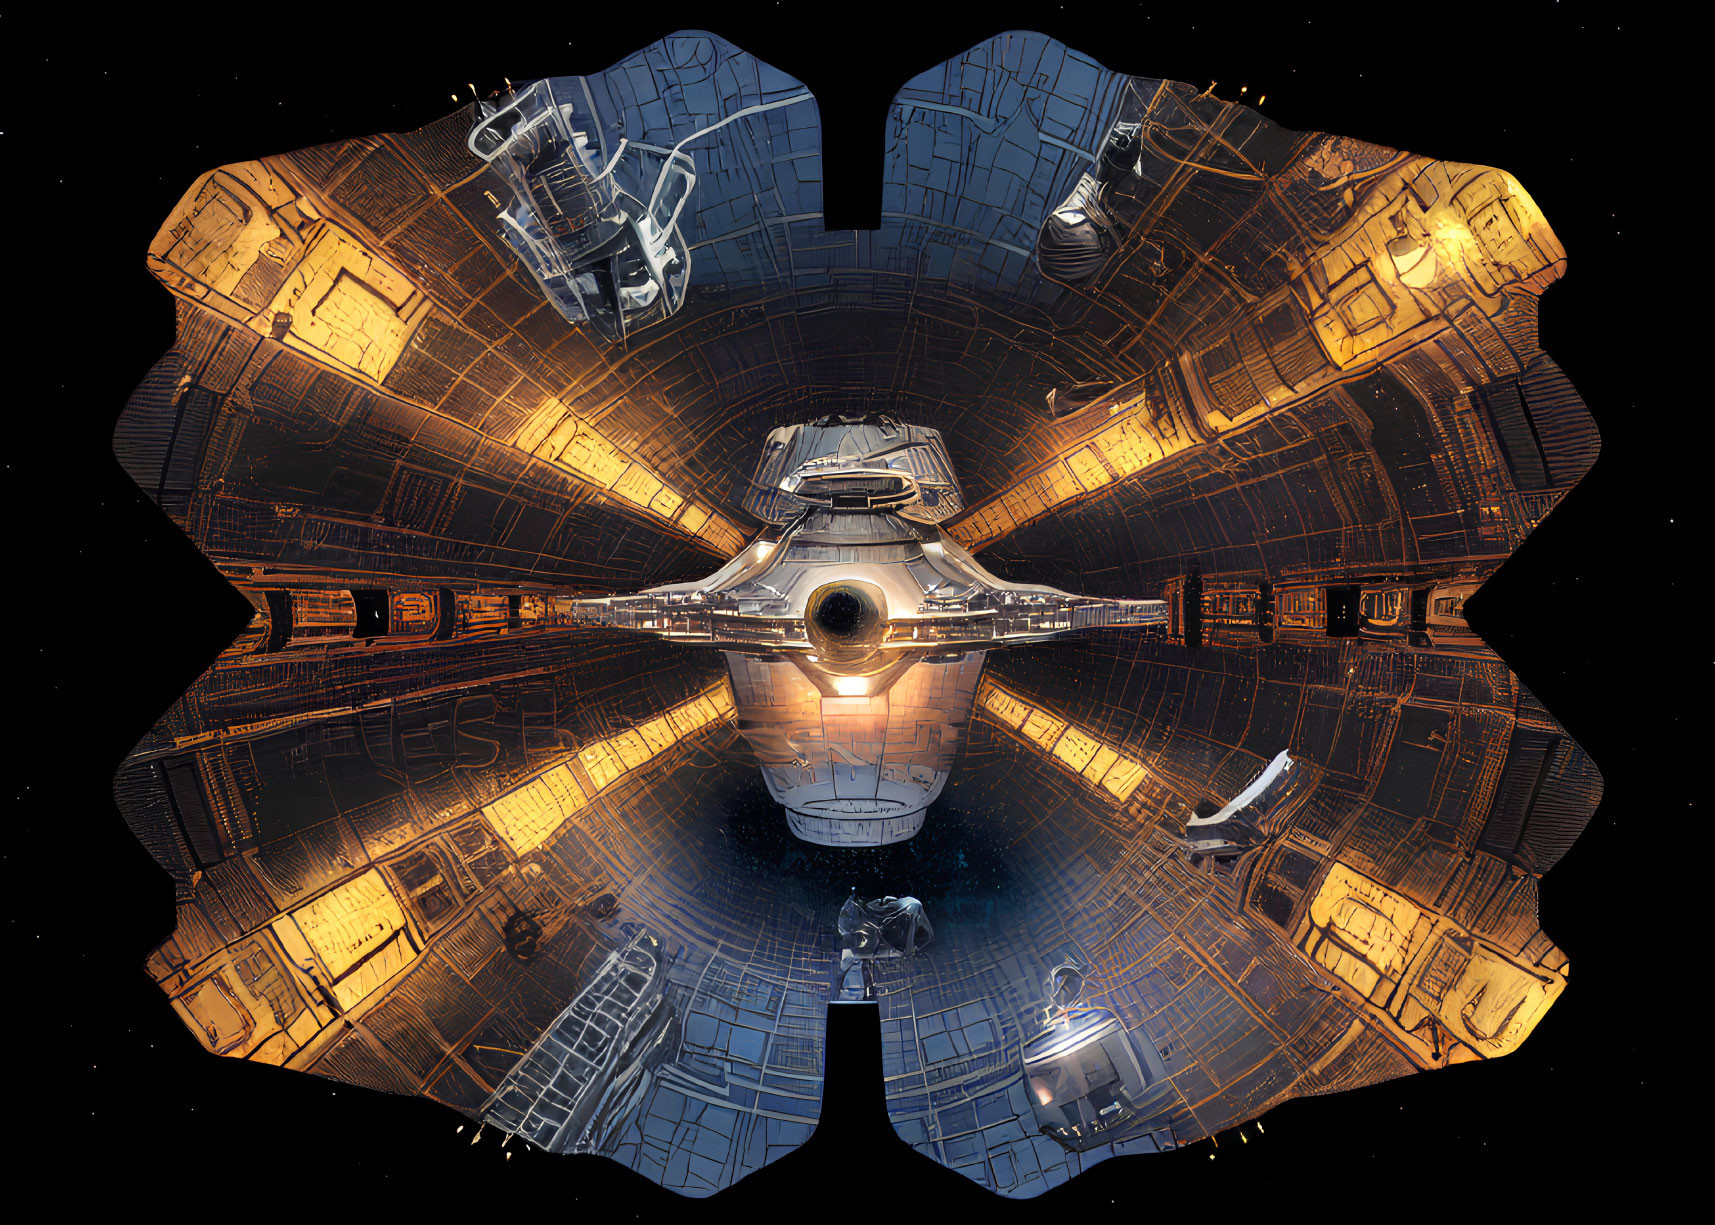 Symmetrical sci-fi spaceship corridor with spherical structure in starry space